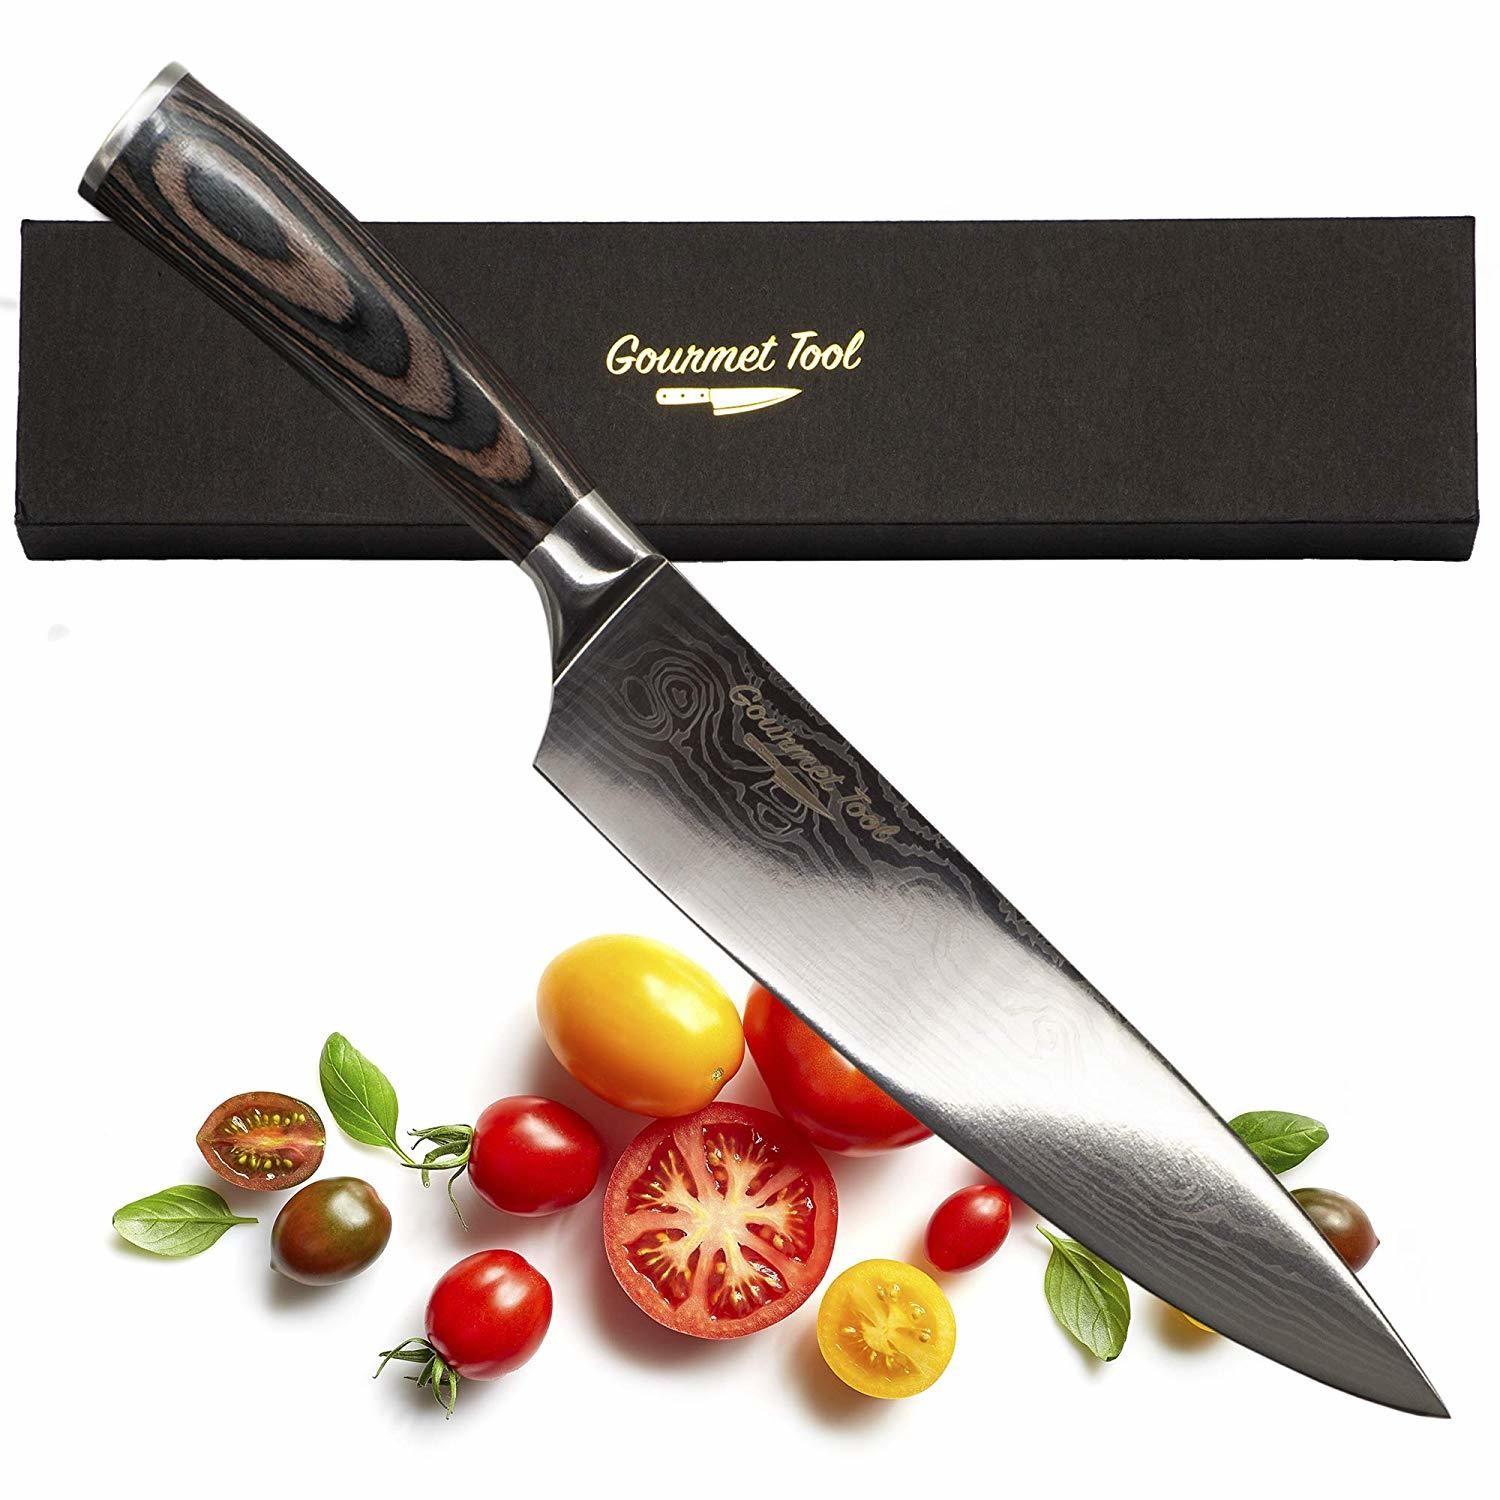 Professional 8 Inch Chef Knife by Gourmet Tool - Ultra Carbon Stainless Steel with Etched Damascus Design - Ergonomic Pakkawood Handle